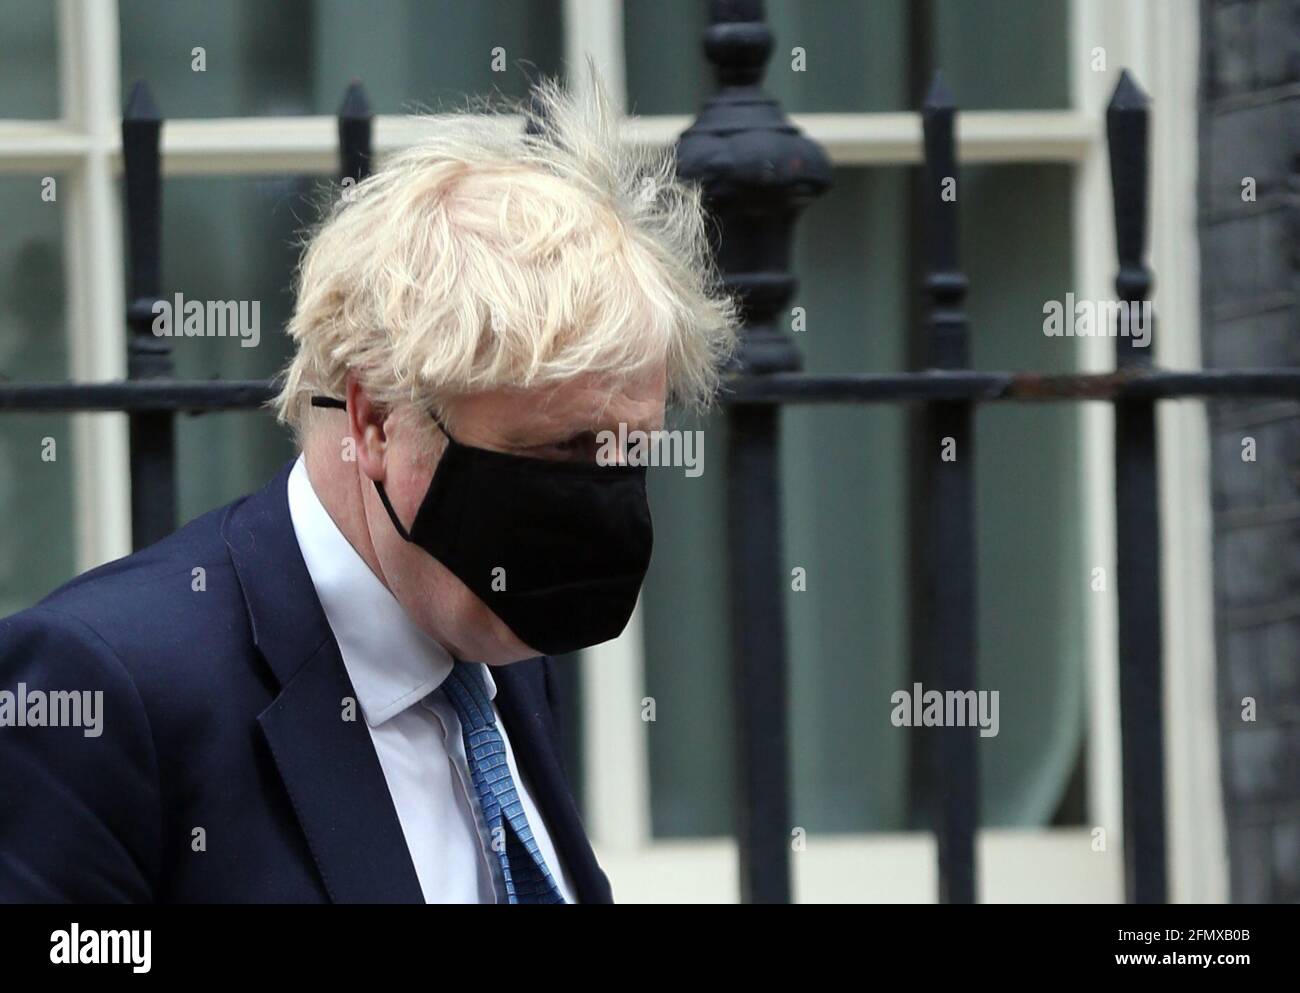 London, England, UK. 12th May, 2021. UK Prime Minister BORIS JOHNSON leaves 10 Downing Street ahead of making a statement on Covid-19 and debate on Queen's Speech in House of Commons. Credit: Tayfun Salci/ZUMA Wire/Alamy Live News Stock Photo